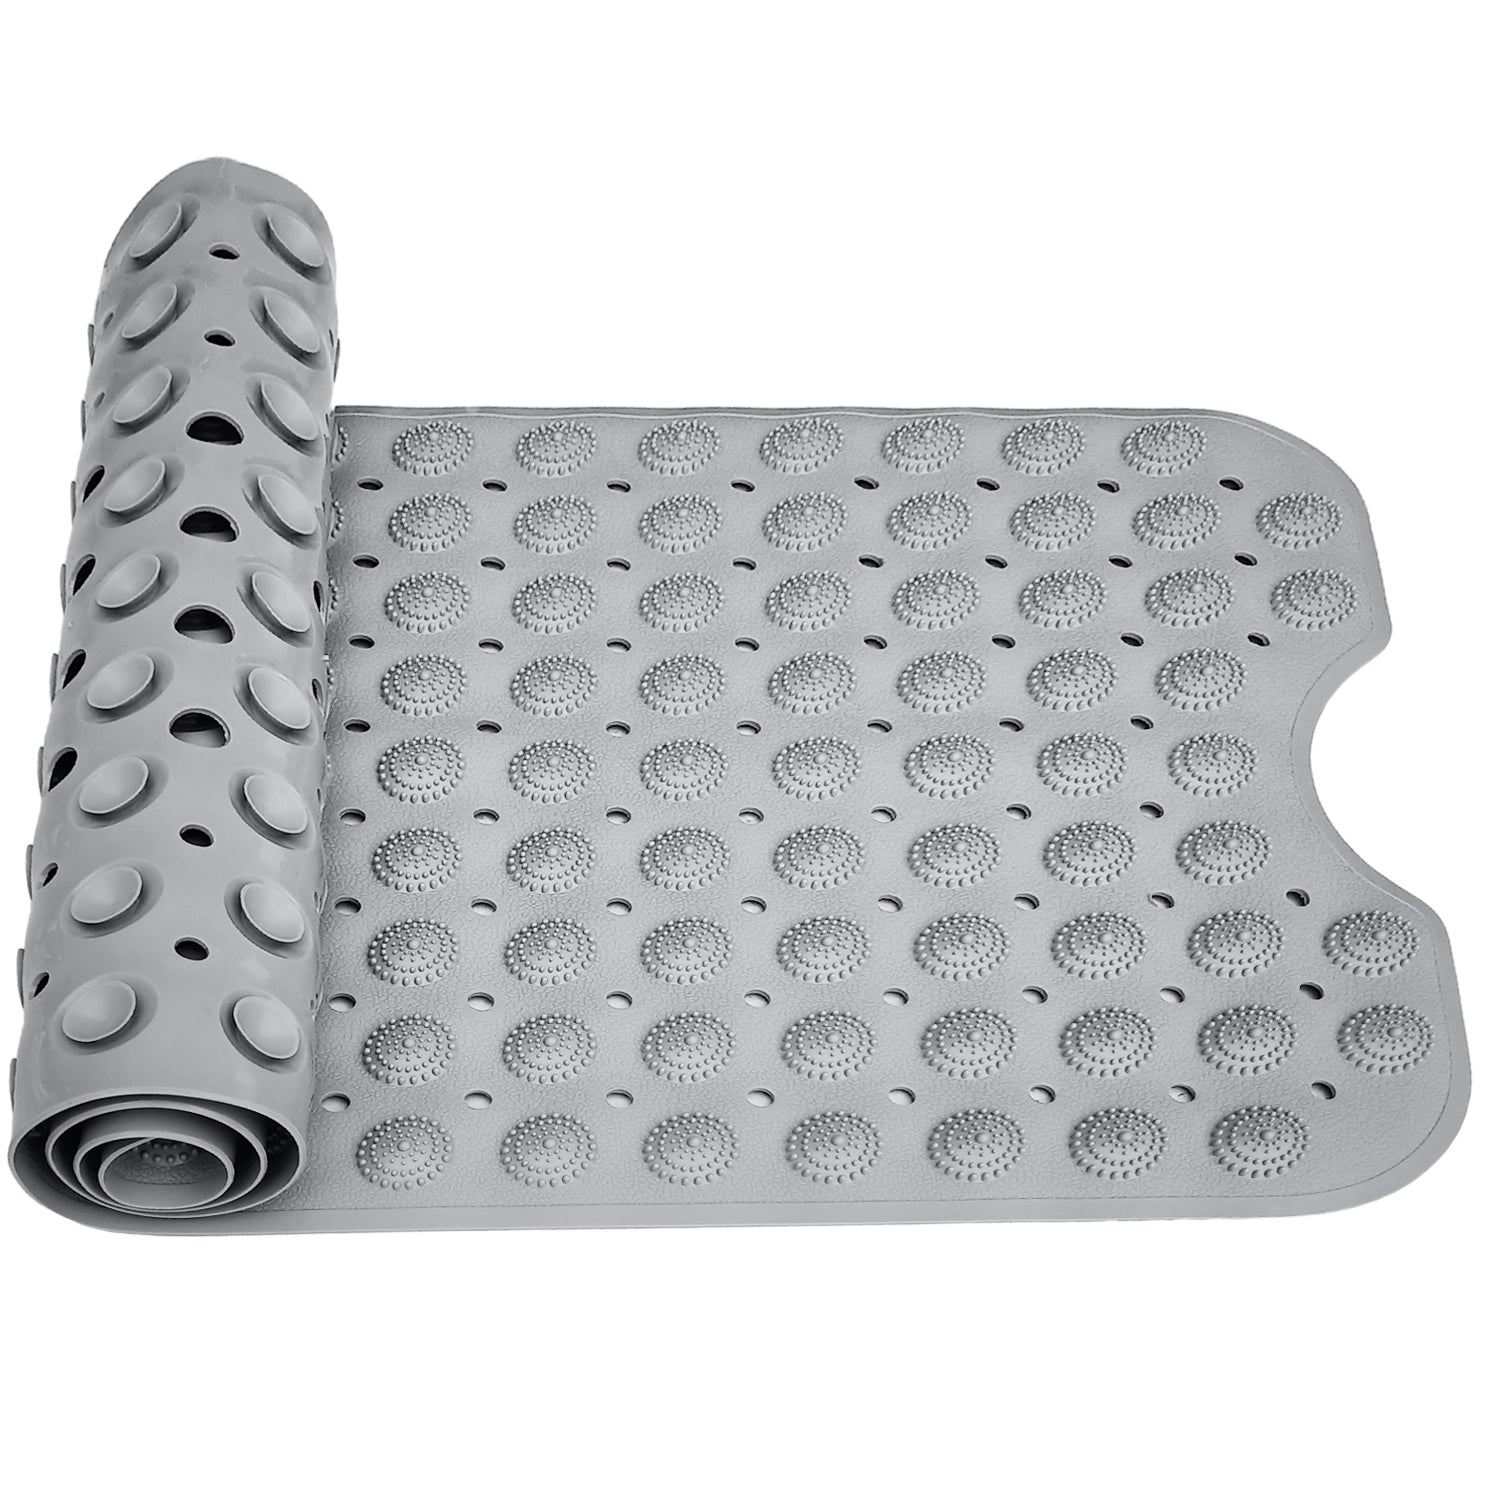 Experia Anti Slip Bath Mat with Suction Cup - 100 x 40 cm (Grey Color With Accu Pebble) LifeKrafts